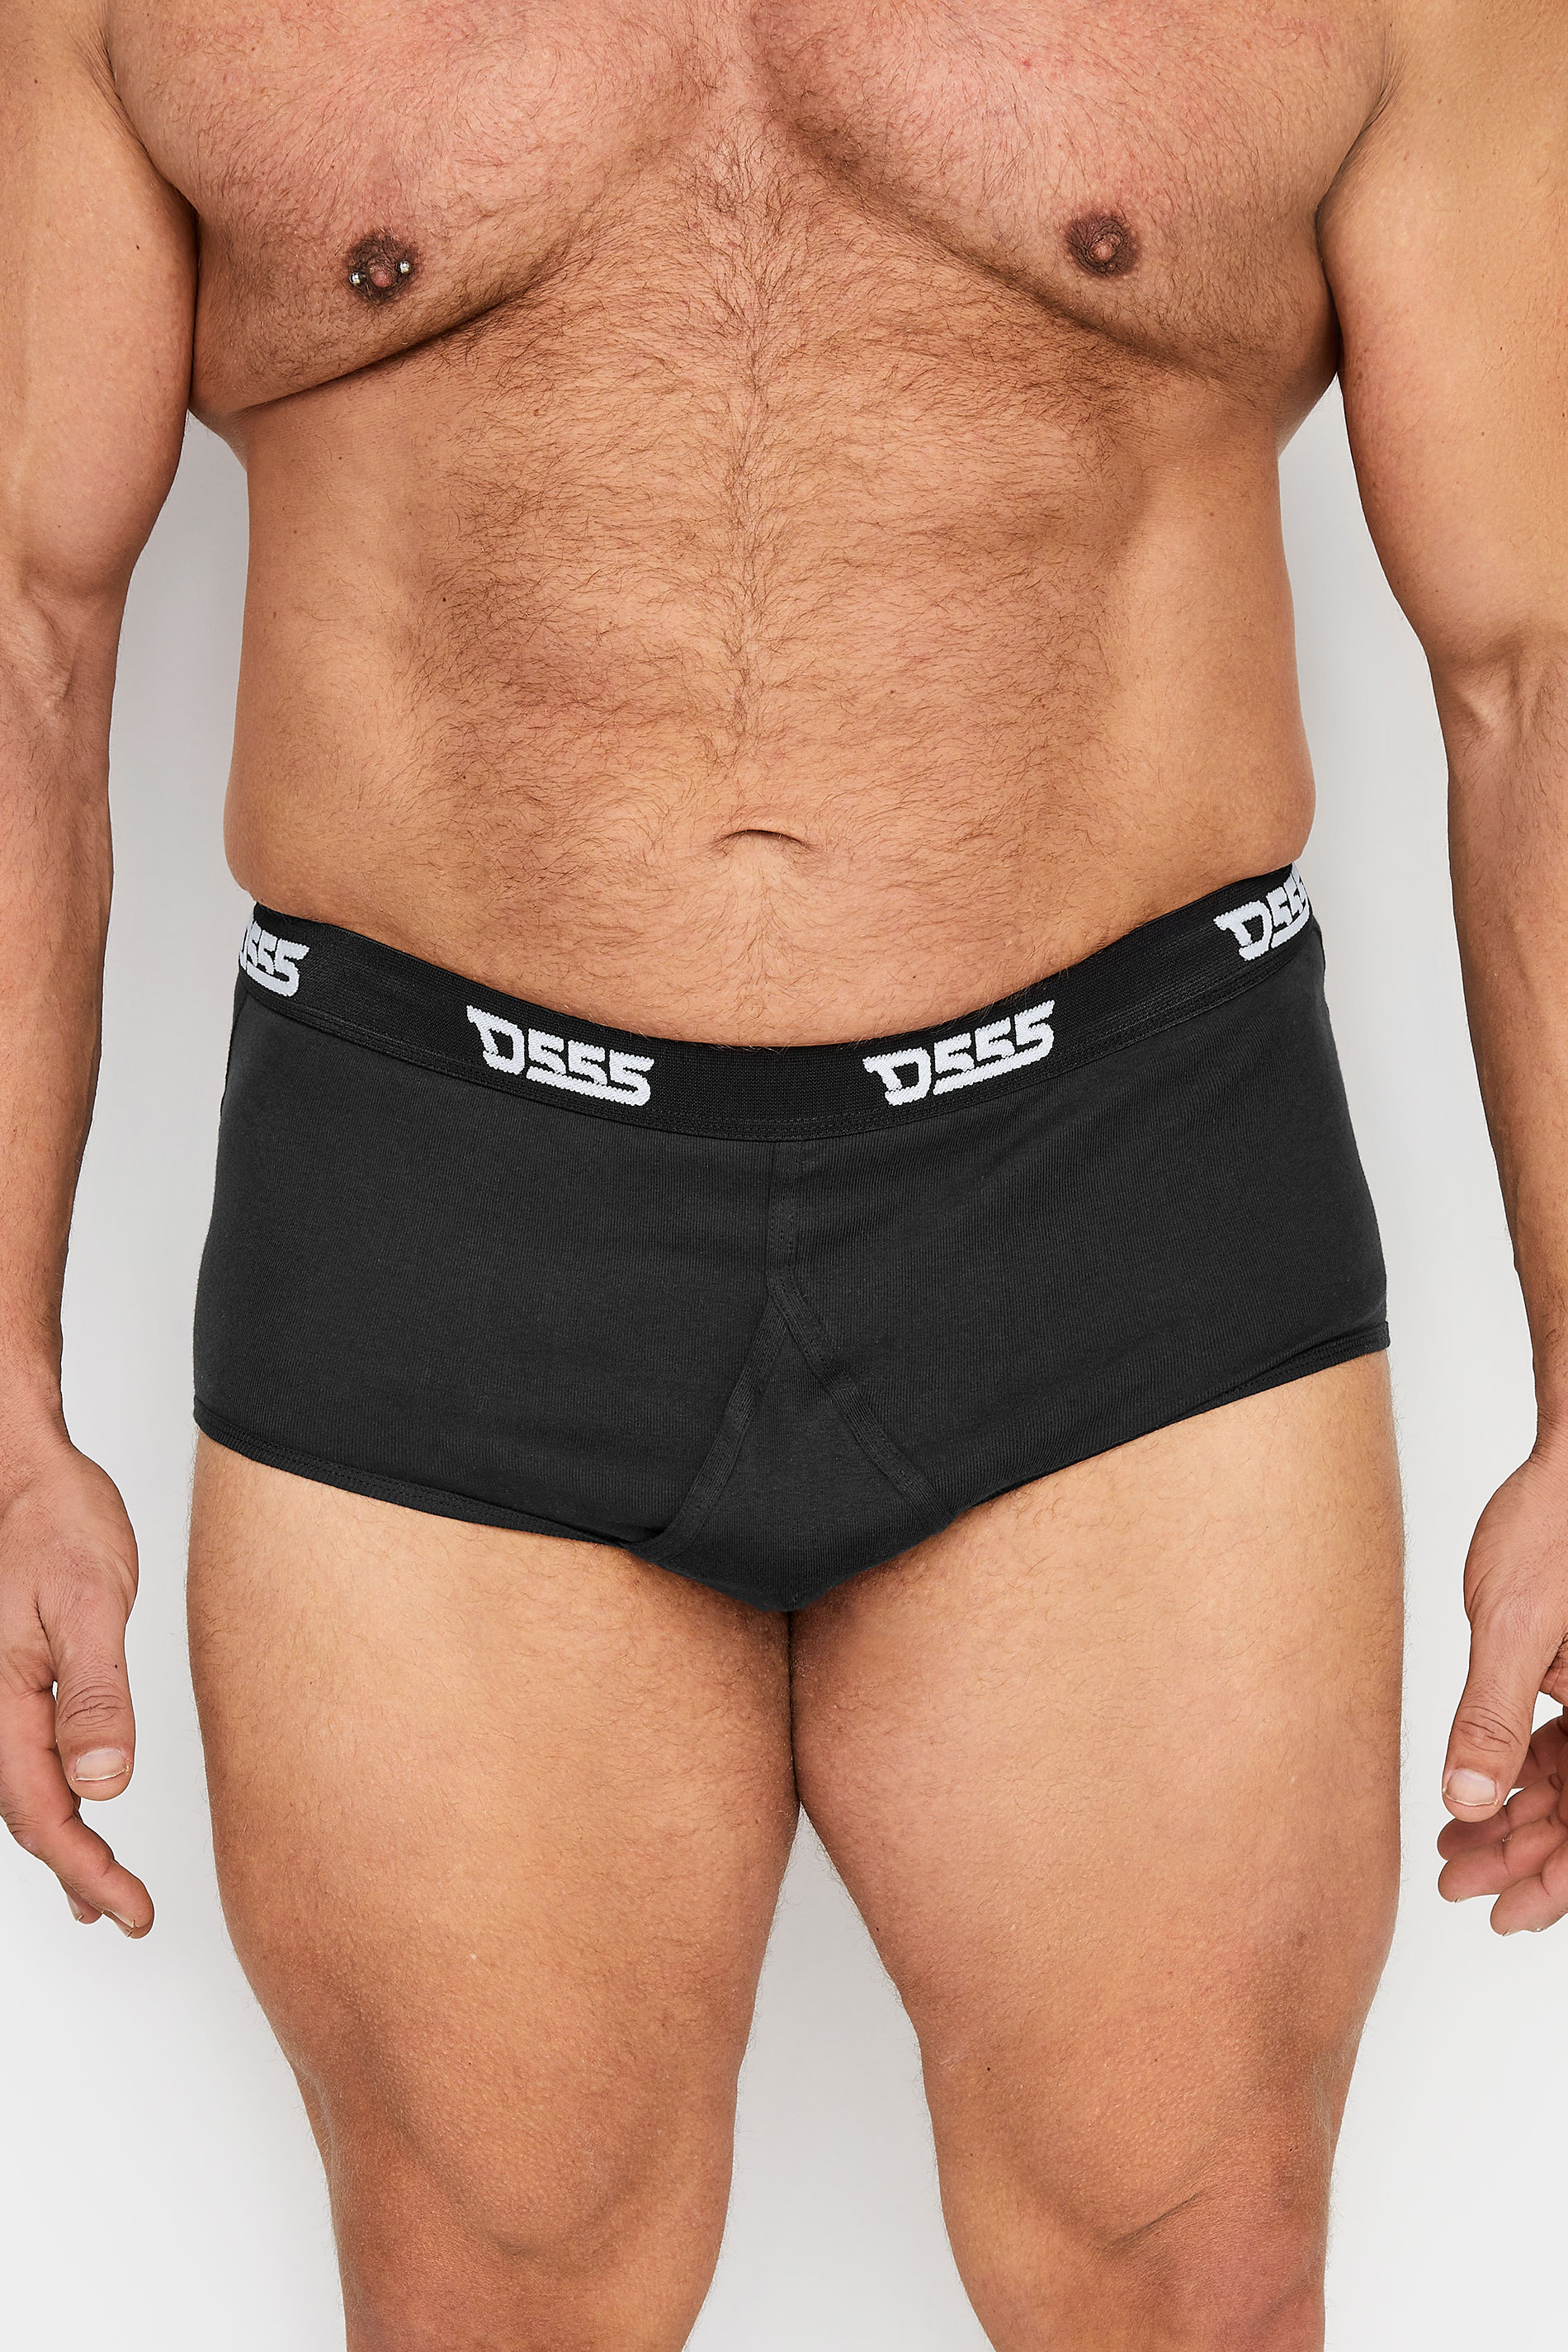 D555 2 PACK Big & Tall Black Branded Front Cotton Briefs | BadRhino 3